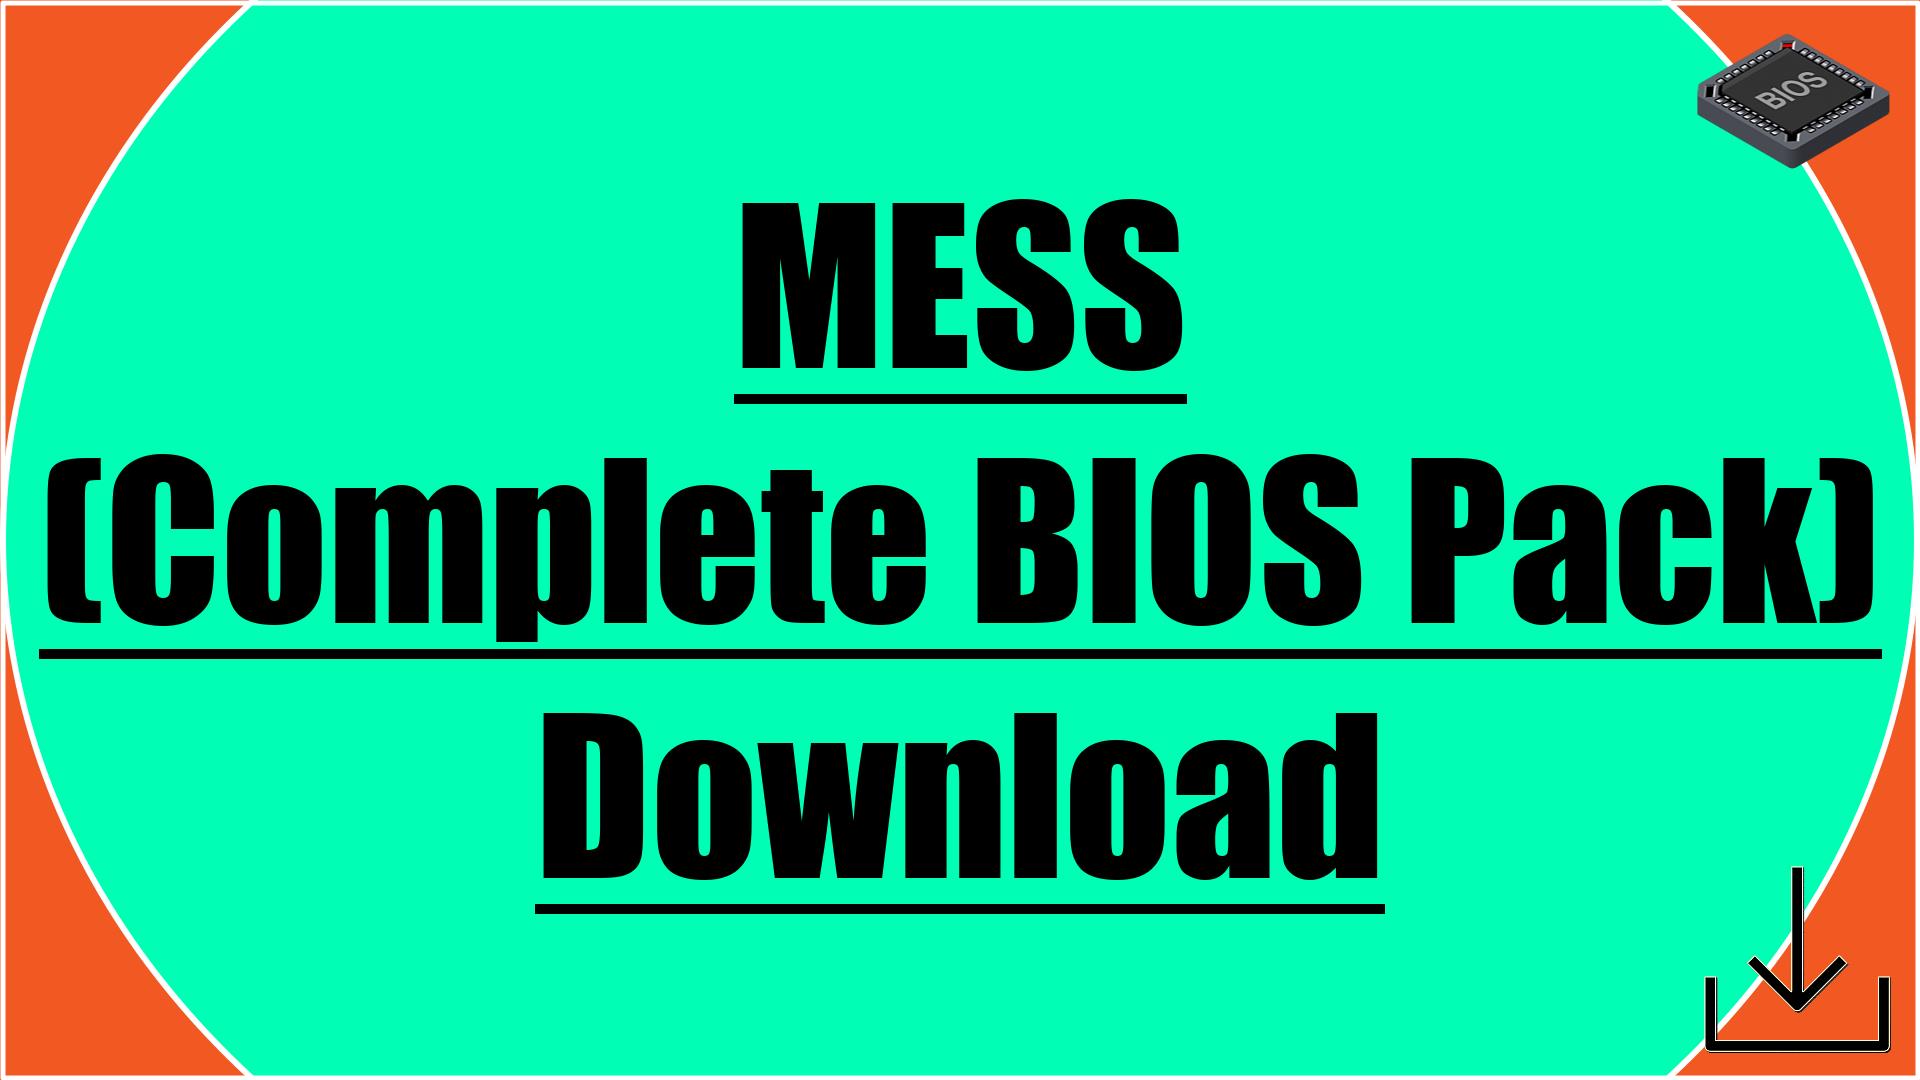 MESS (Complete BIOS Pack) Download